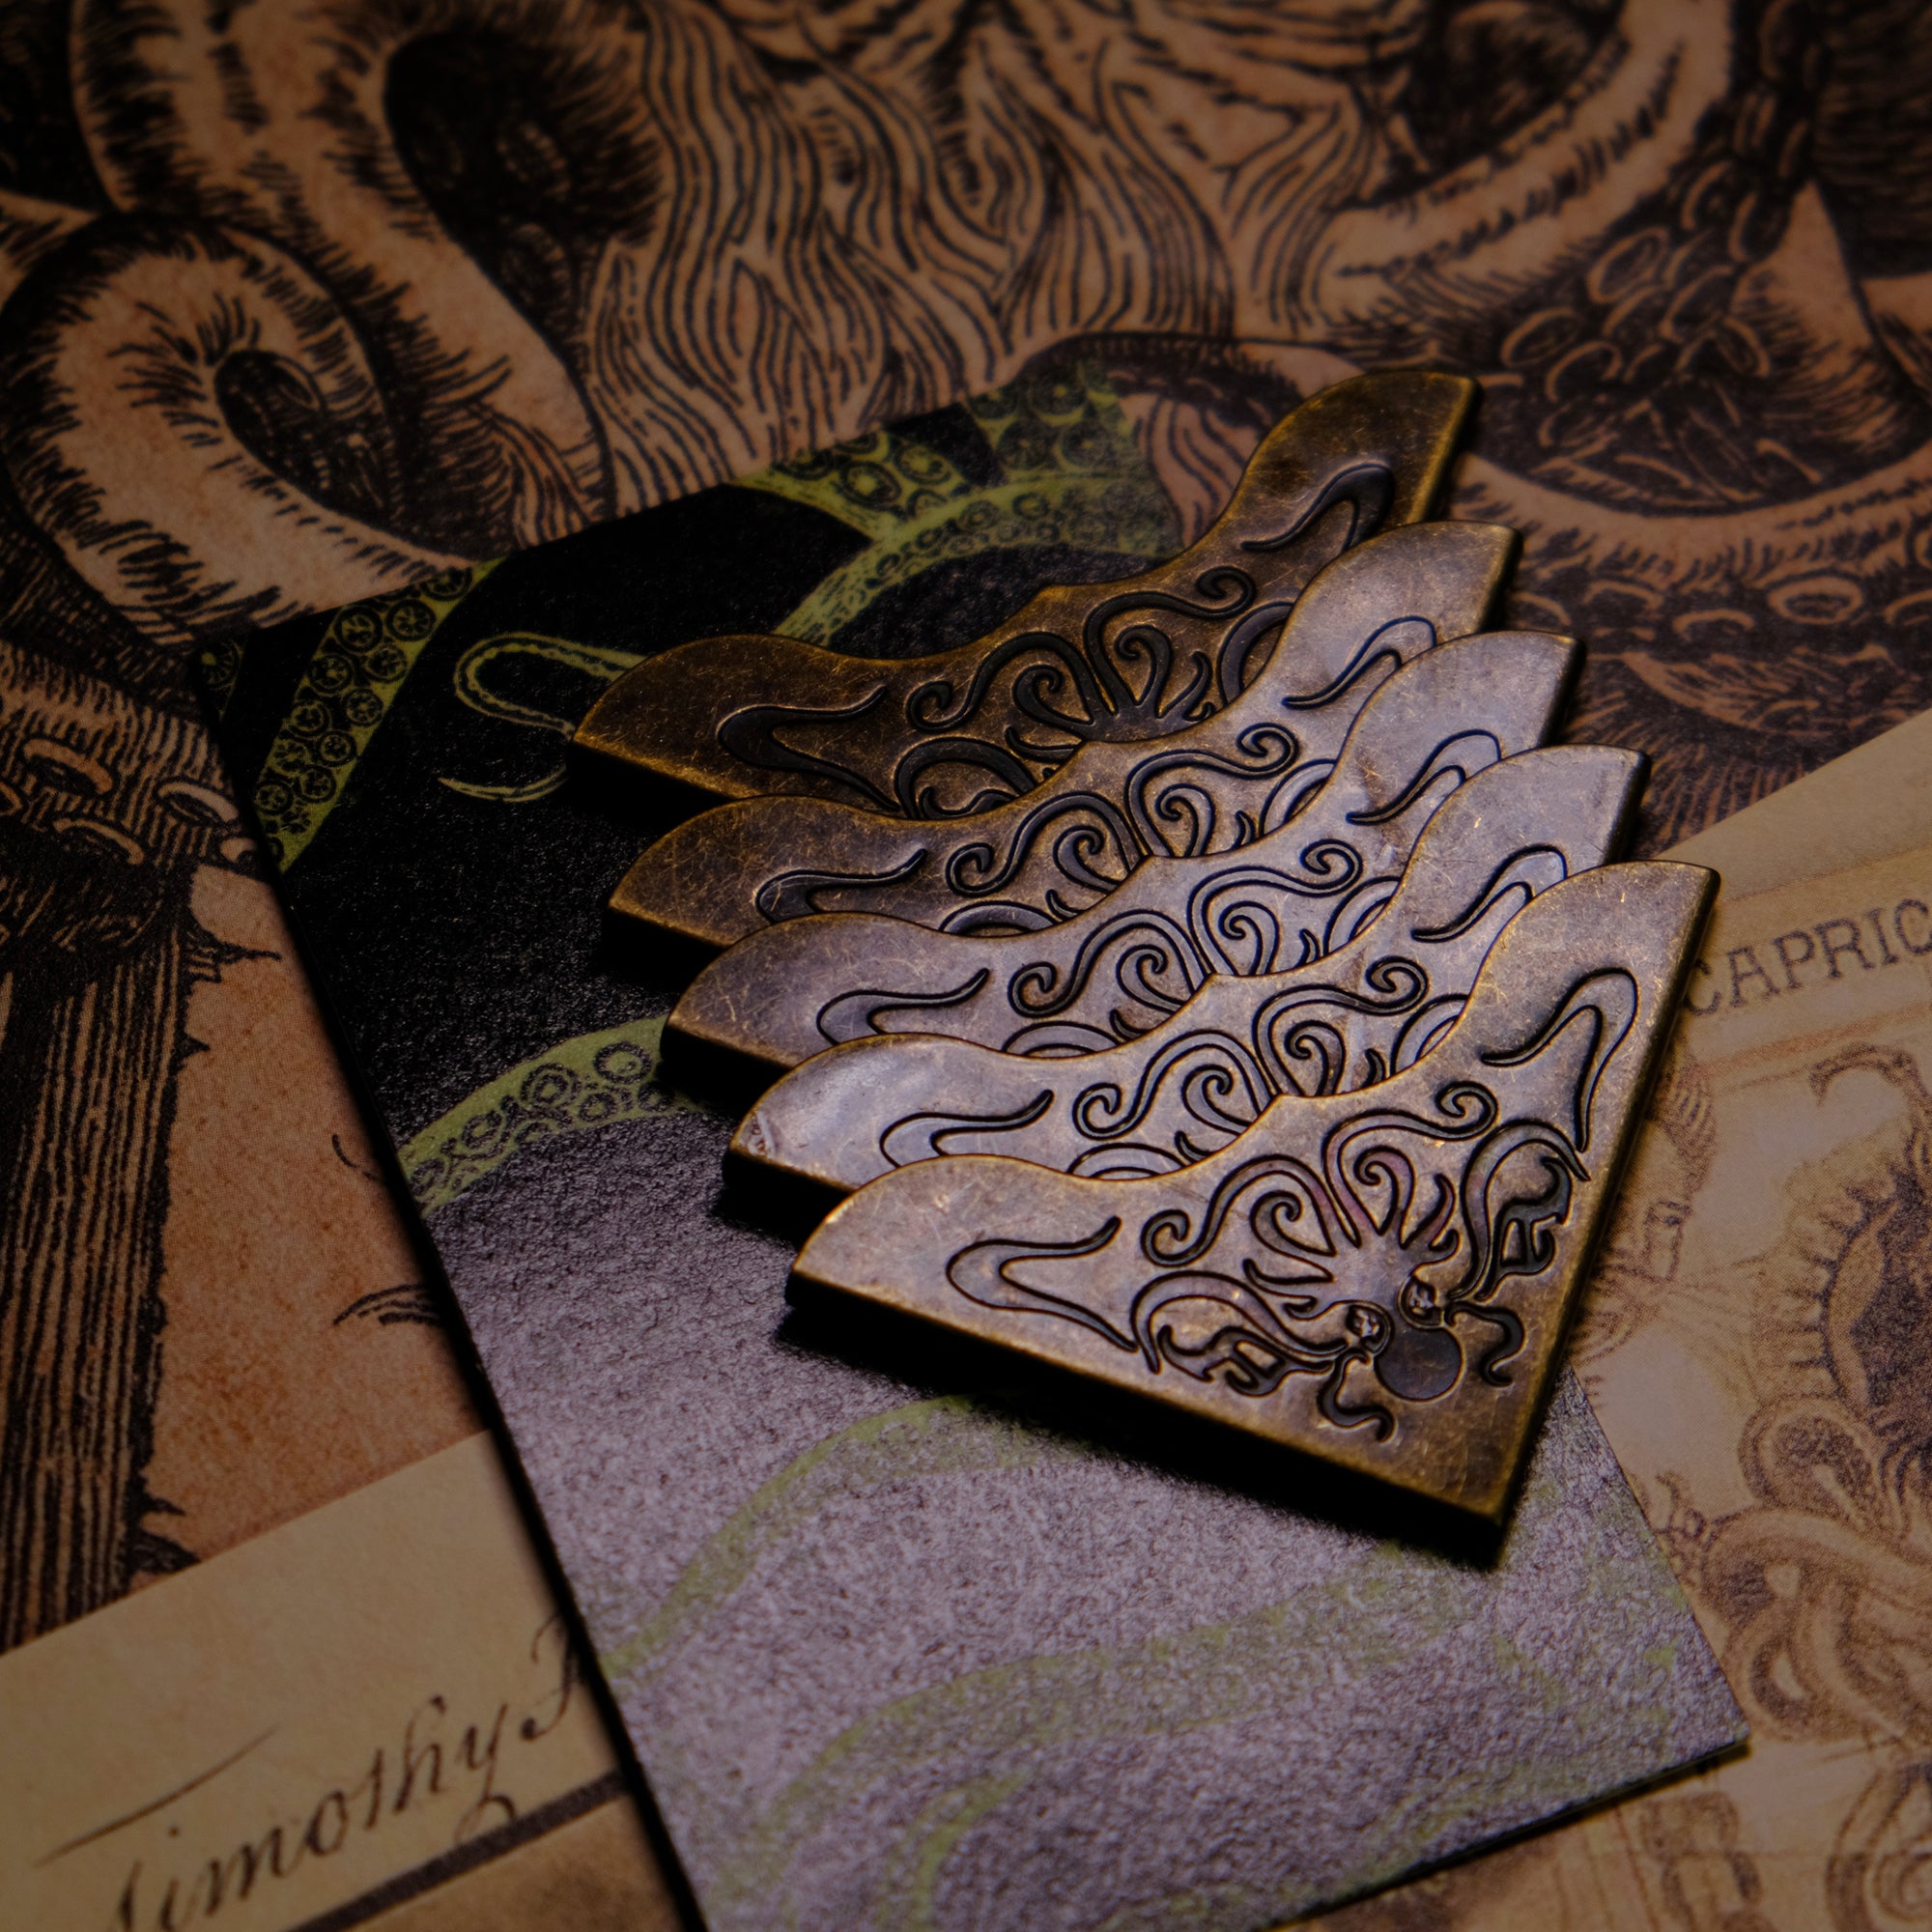 Bookworms from Shaggai Cthulhu Metal Book Corners – Vermilion Collection